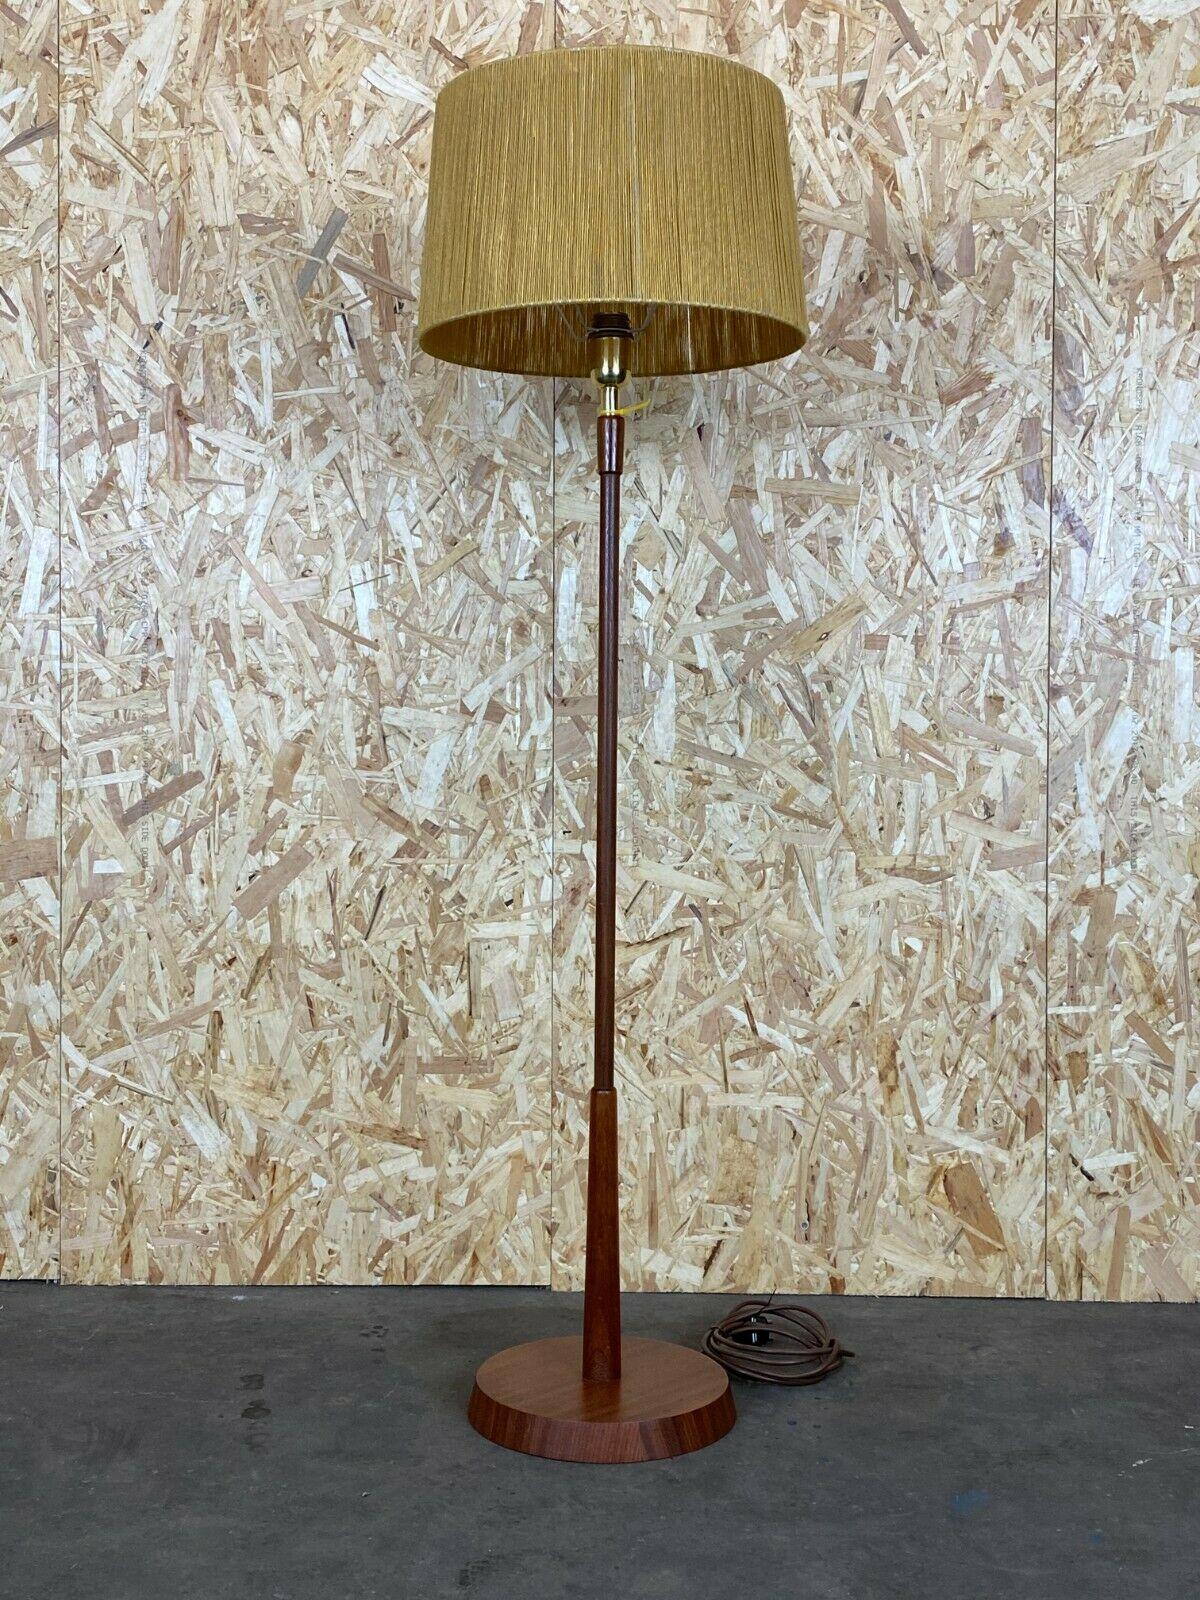 60s 70s Lamp light floor lamp Temde Teak Space Age Design.

Object: floor lamp

Manufacturer: Temde

Condition: good

Age: around 1960-1970

Dimensions:

Diameter = 40cm
Height = 135cm

Other notes:

The pictures serve as part of